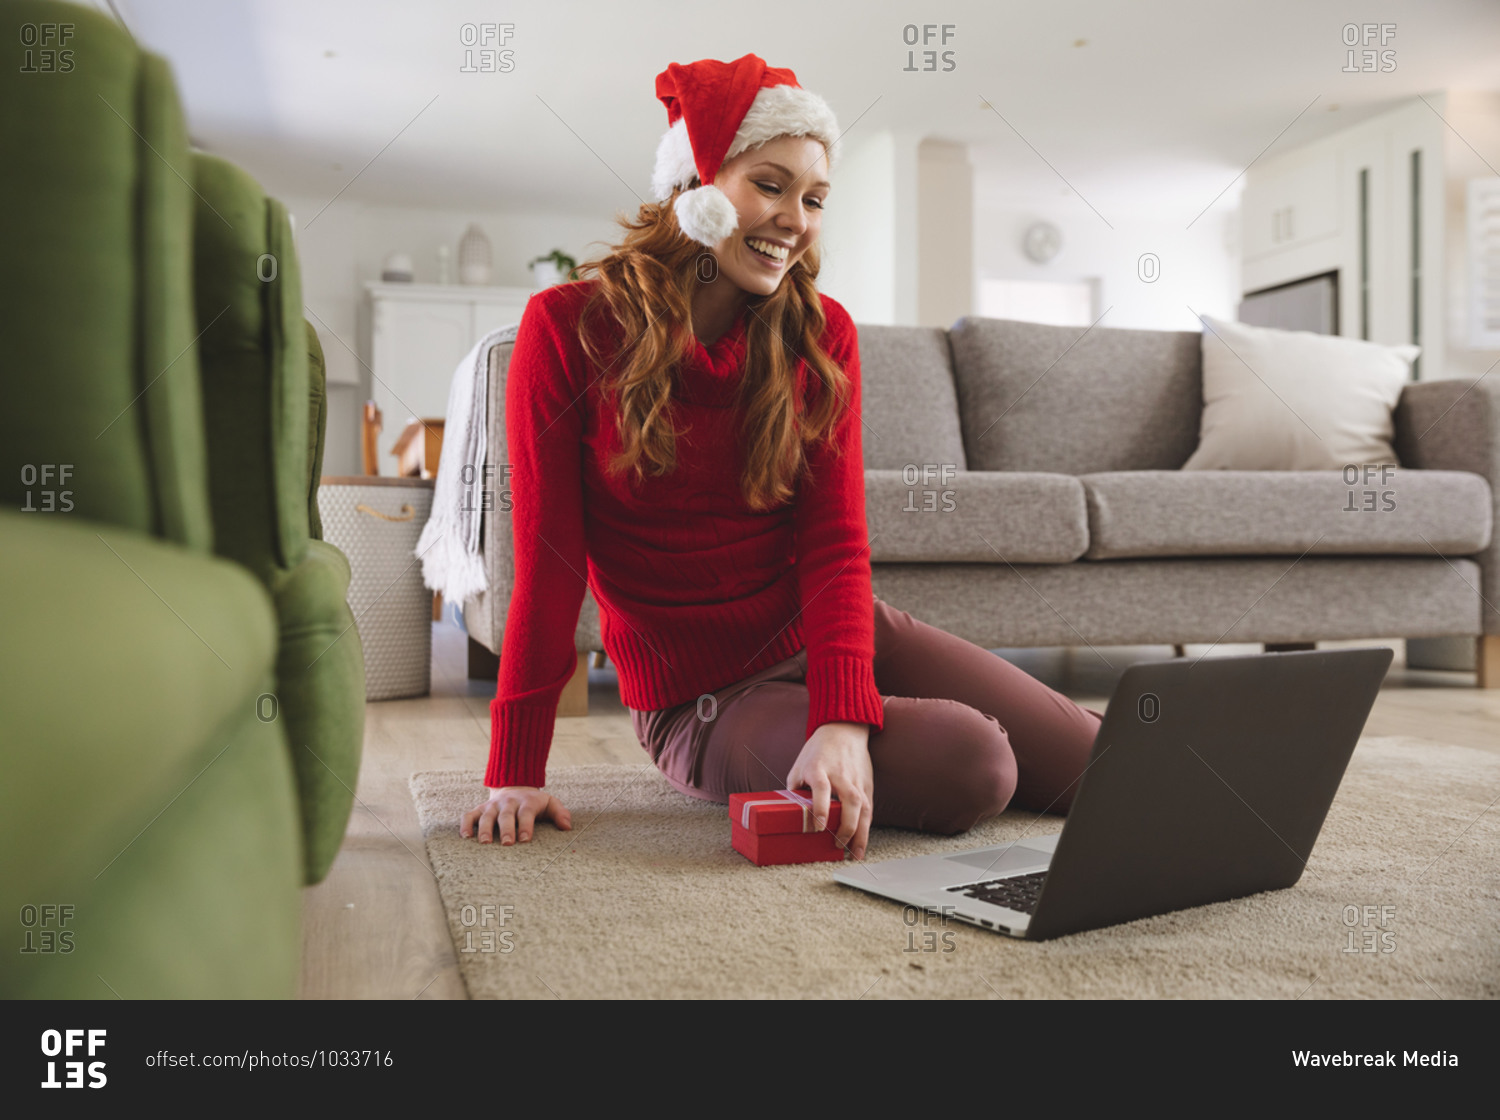 Caucasian woman spending time at home, in living room, smiling, wearing Christmas hat, holding a gift during a video call. Social distancing during Covid 19 Coronavirus quarantine lockdown.